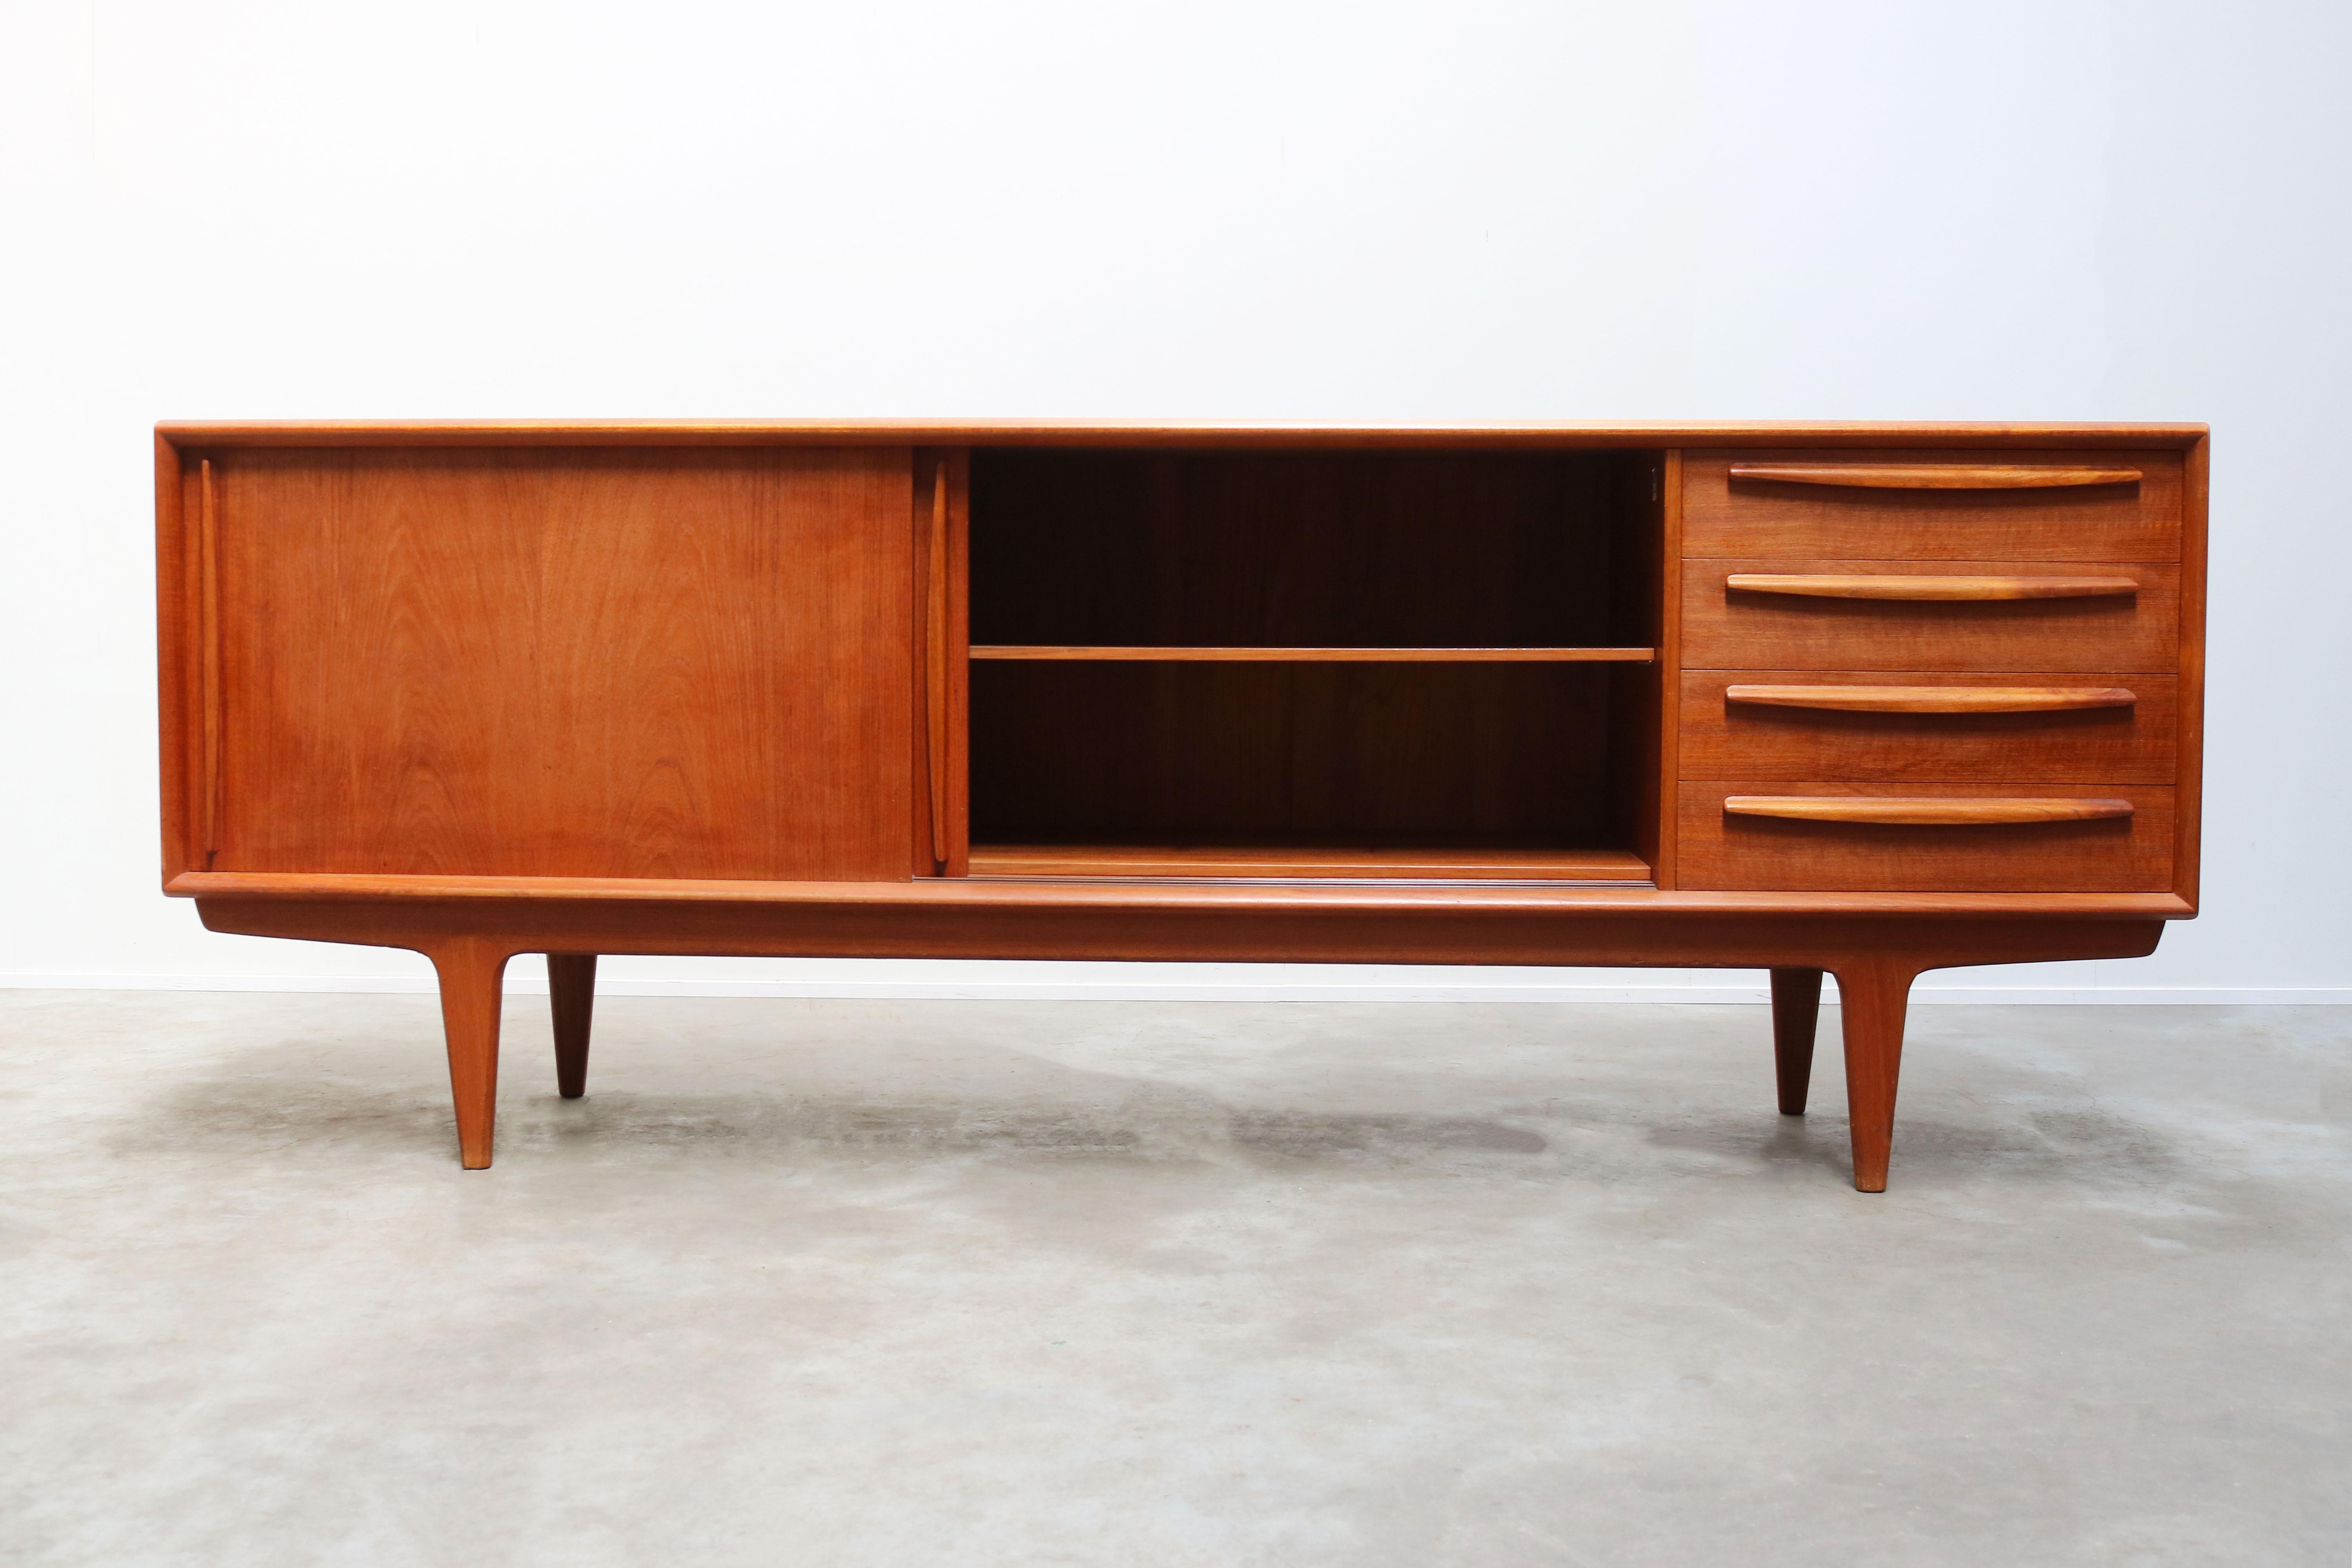 Gorgeous Danish design credenza/sideboard in teak designed and produced by Bernhard Pedersen. Bernhard Pedersen is known for very high quality Danish furniture and this piece perfectly reflects that. The sideboard has 2 sliding doors and 4 drawers.